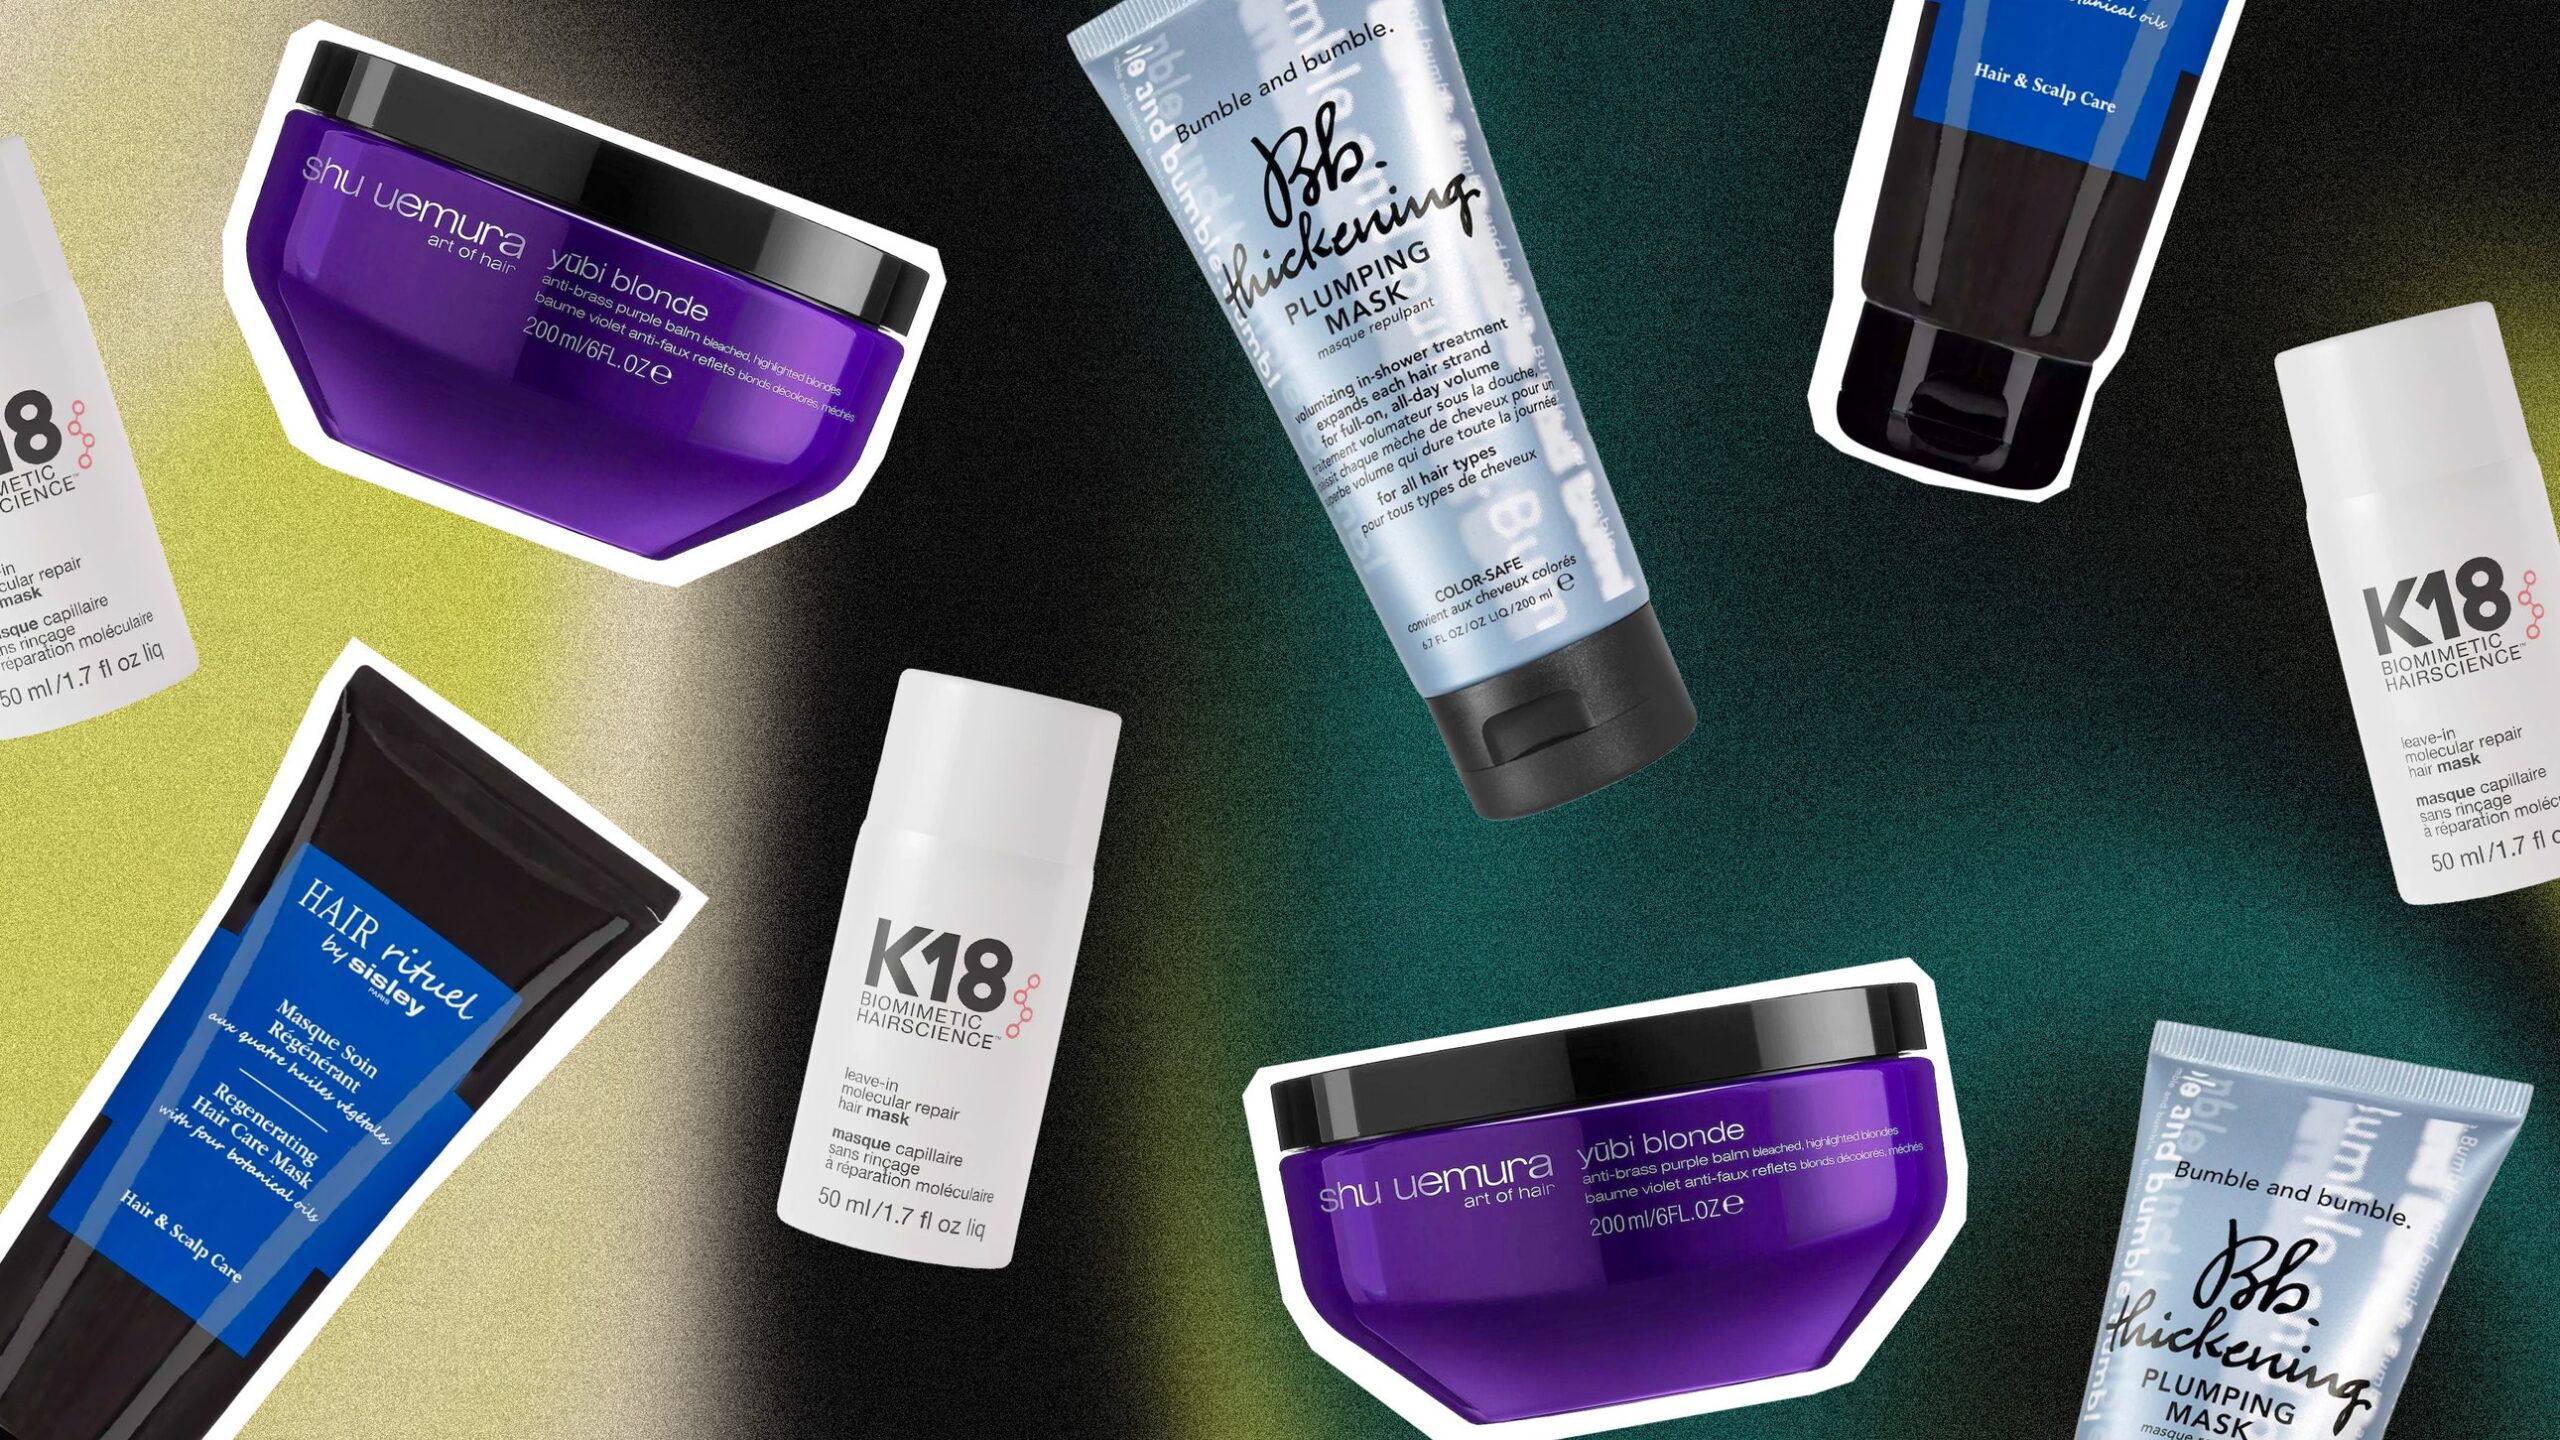 Type-Specific Masks: Hydrating And Repairing Hair Masks For Every Texture